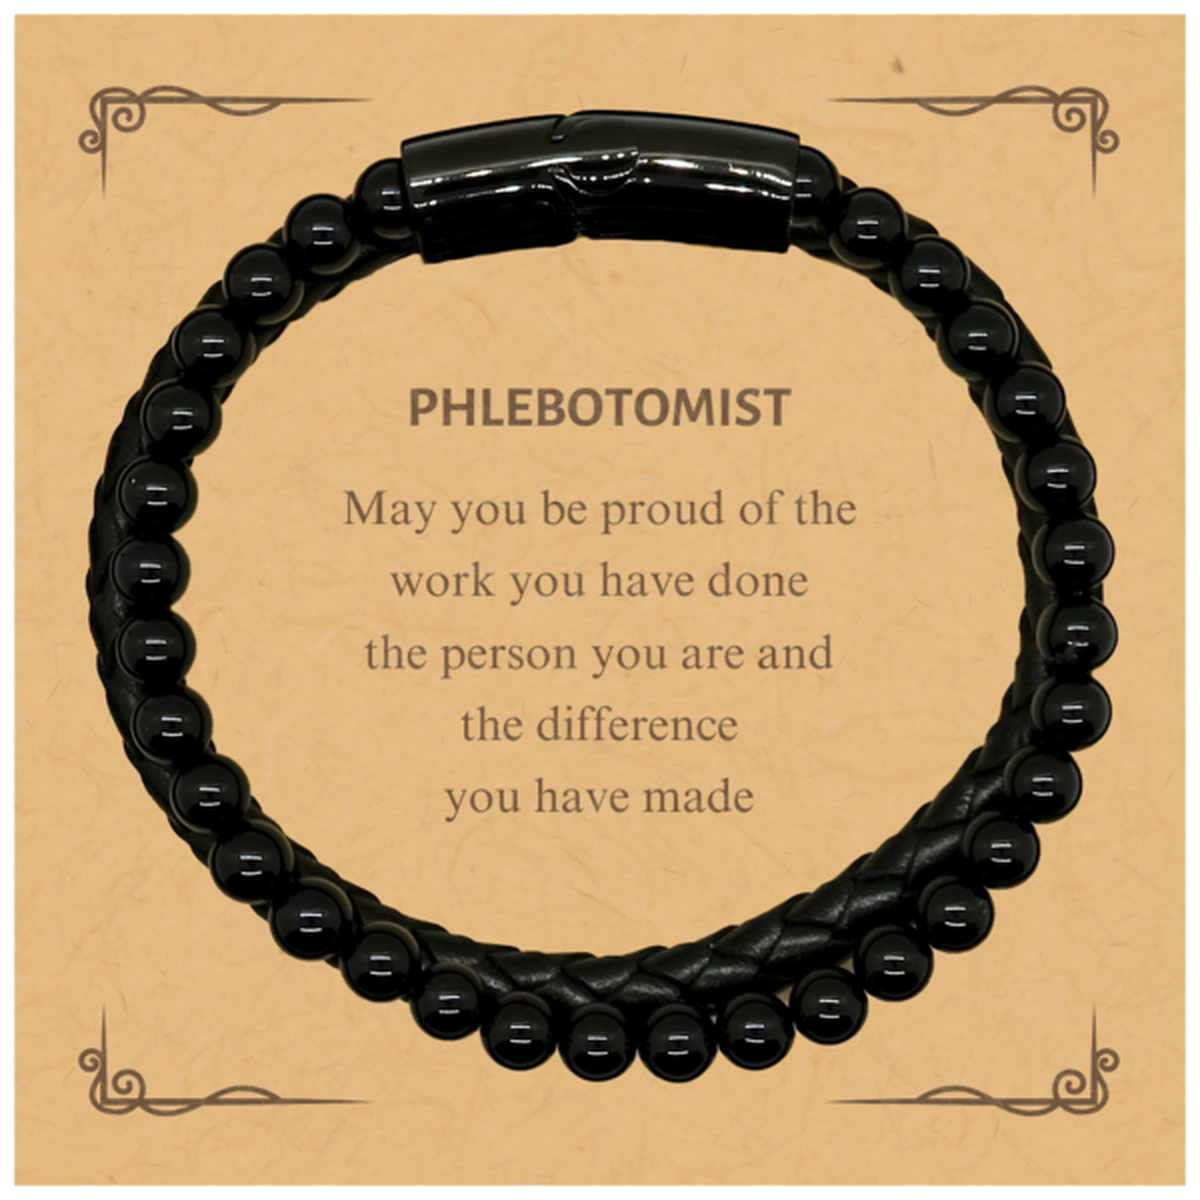 Phlebotomist May you be proud of the work you have done, Retirement Phlebotomist Stone Leather Bracelets for Colleague Appreciation Gifts Amazing for Phlebotomist